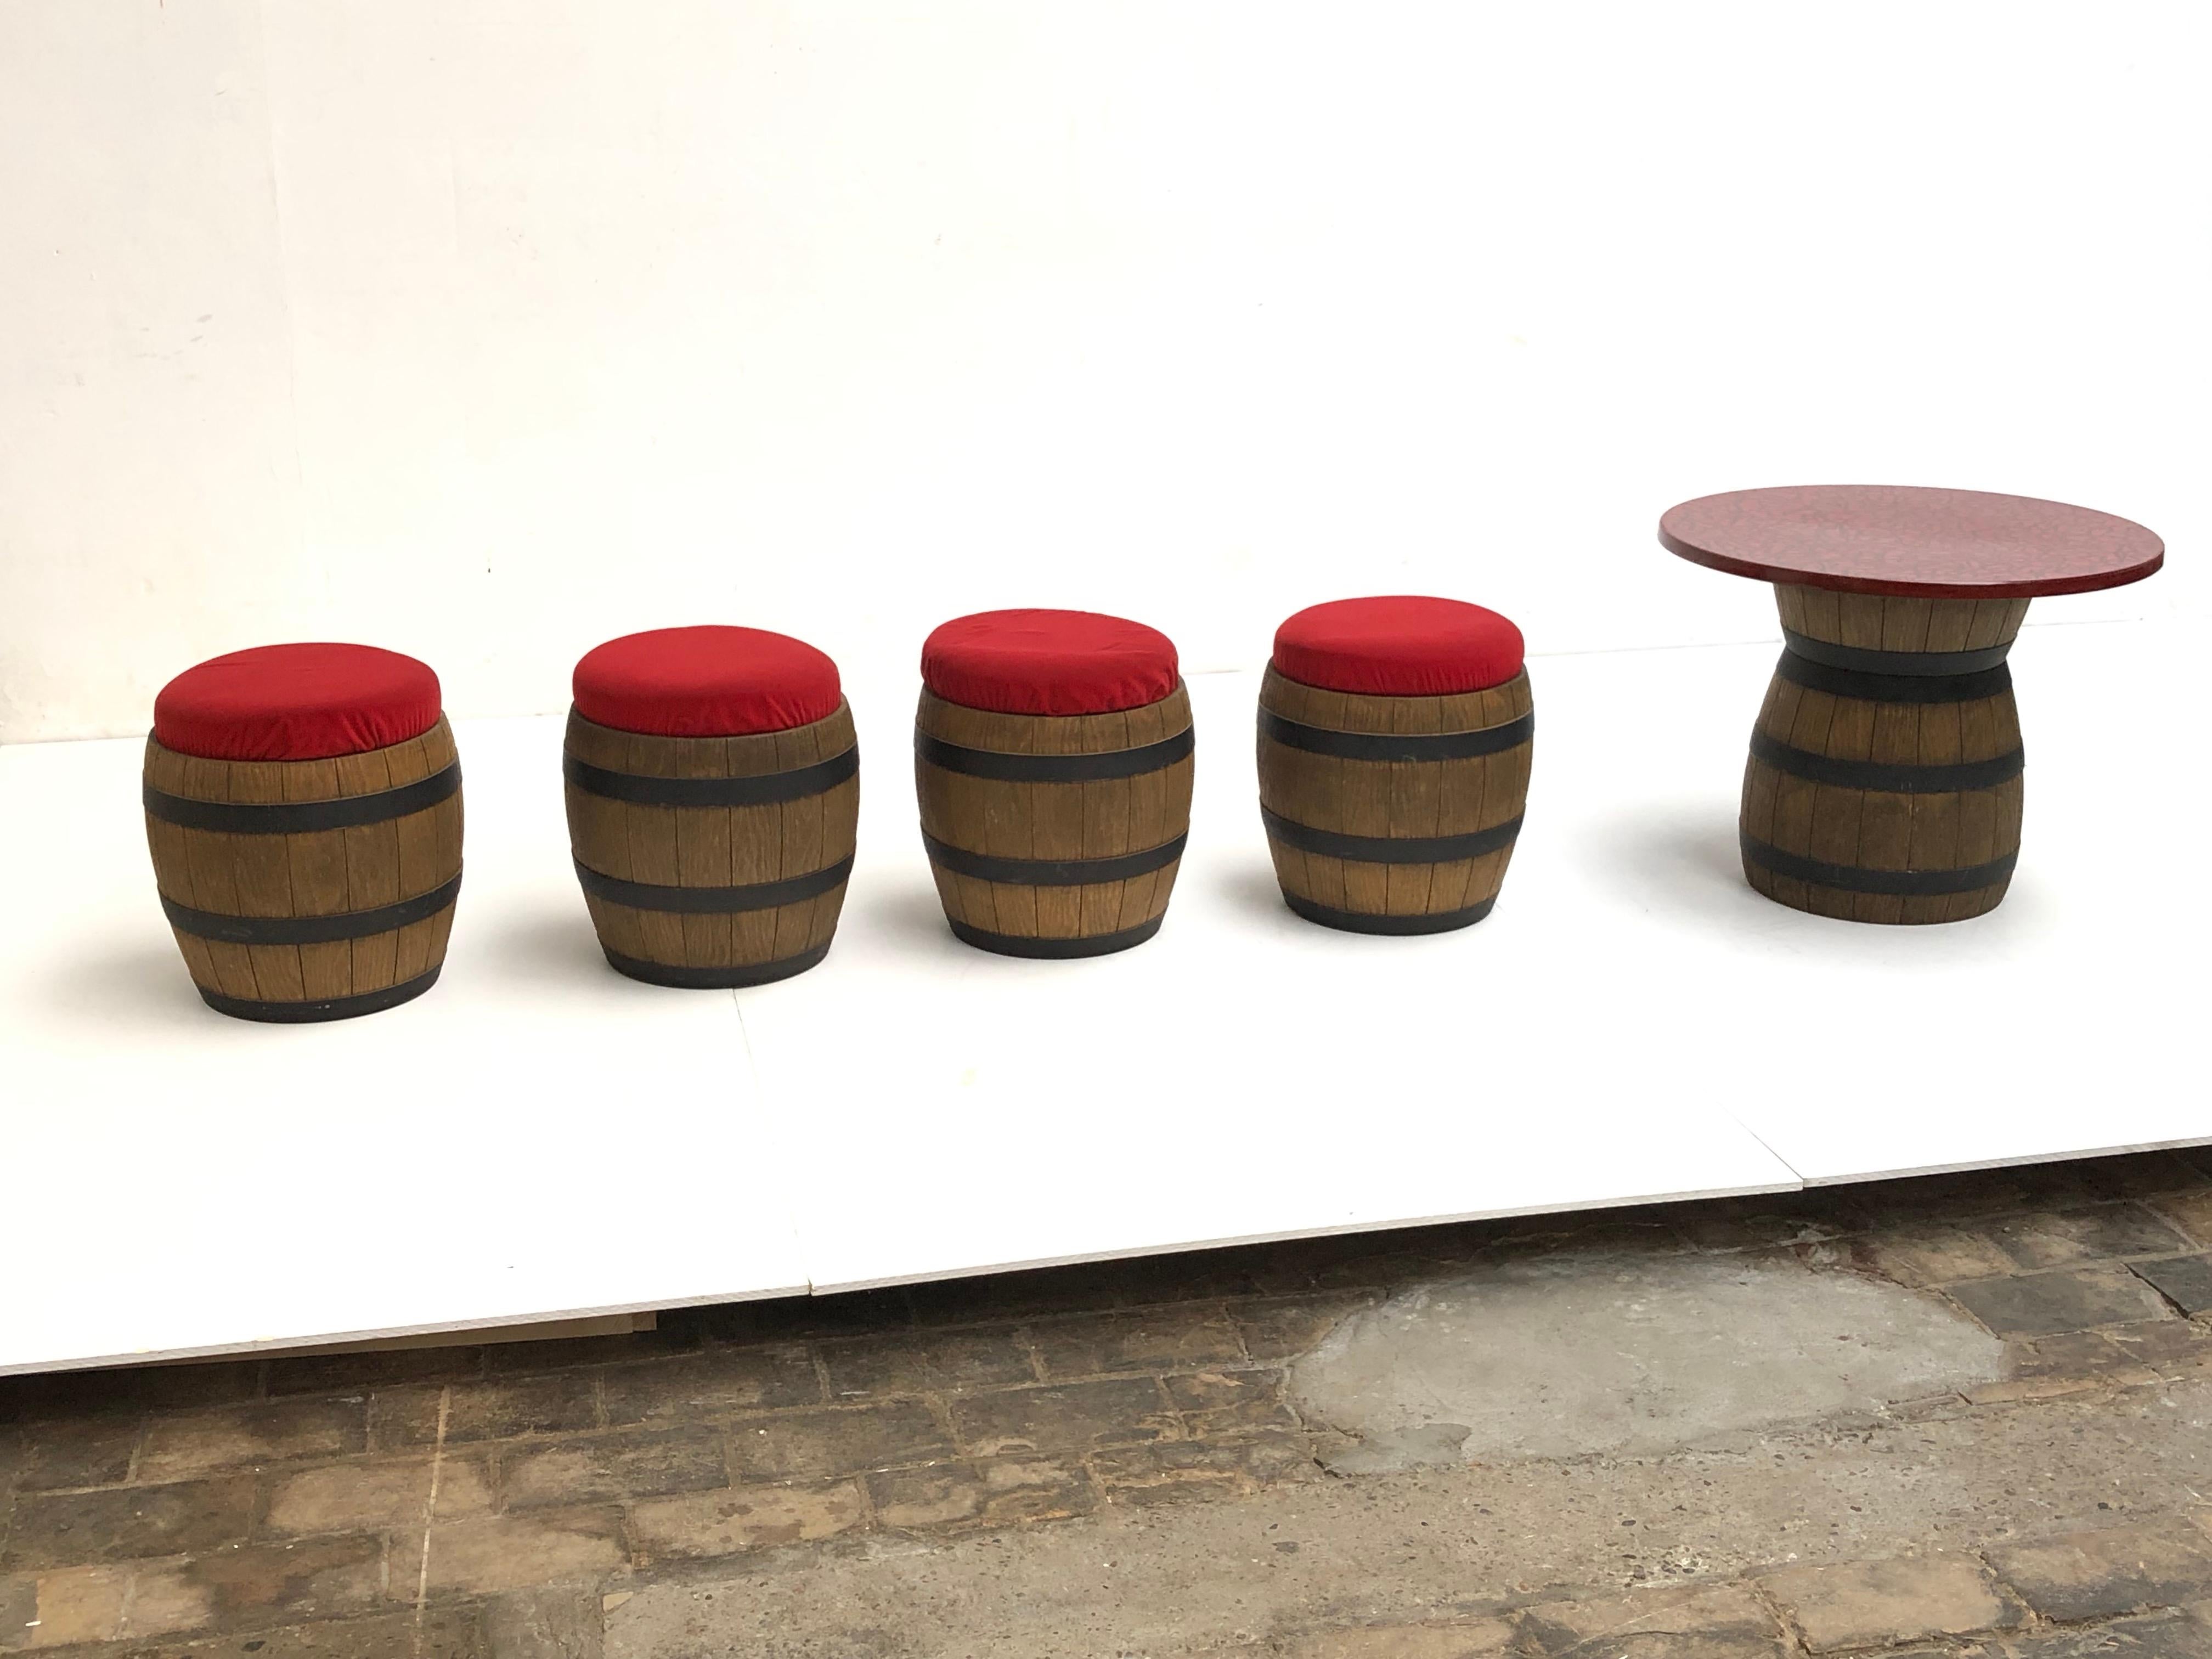 Unique drinking table and stools manufactured by Emsla in Germany in the 1970s. 

This 'Whiskey Barrel' set consisting of a table with 4 stools
1 of the 4 stools has a pressed styrofoam cooling compartment (for your drinks and ice), the other 3